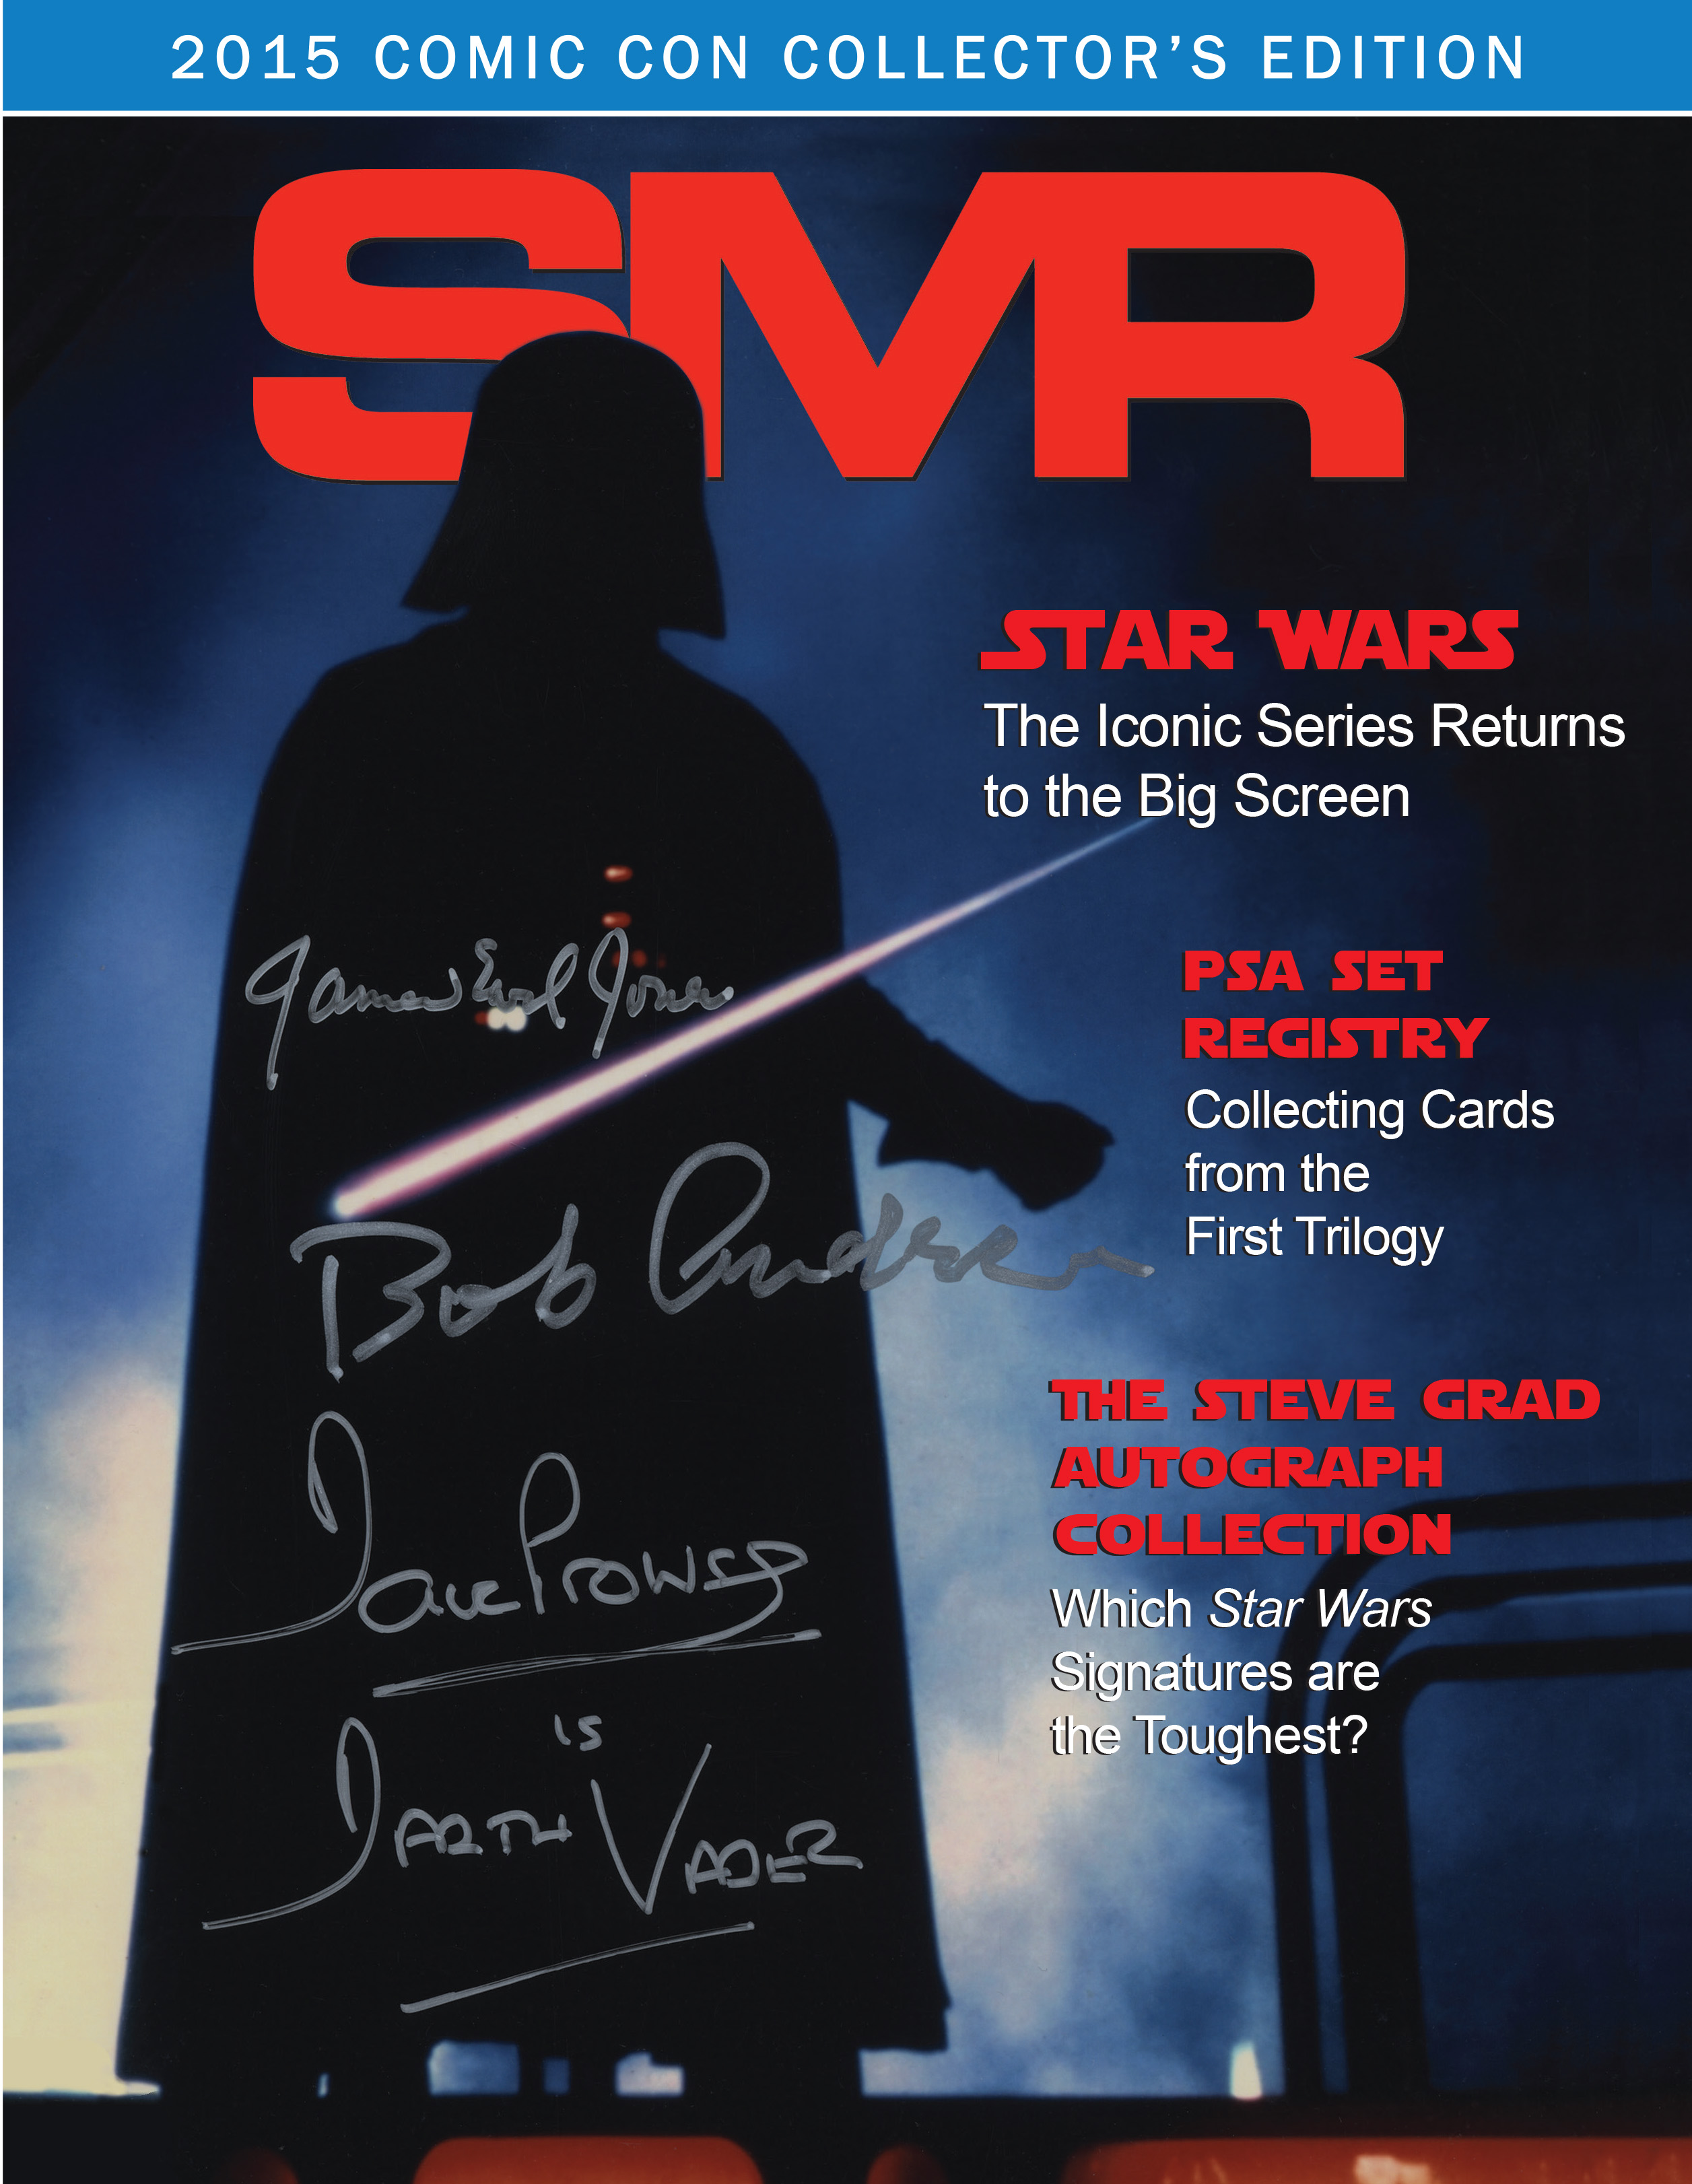 While supplies last, pick up a free copy of SMR magazine at the PSA booth during the 2015 New York Comic Con.